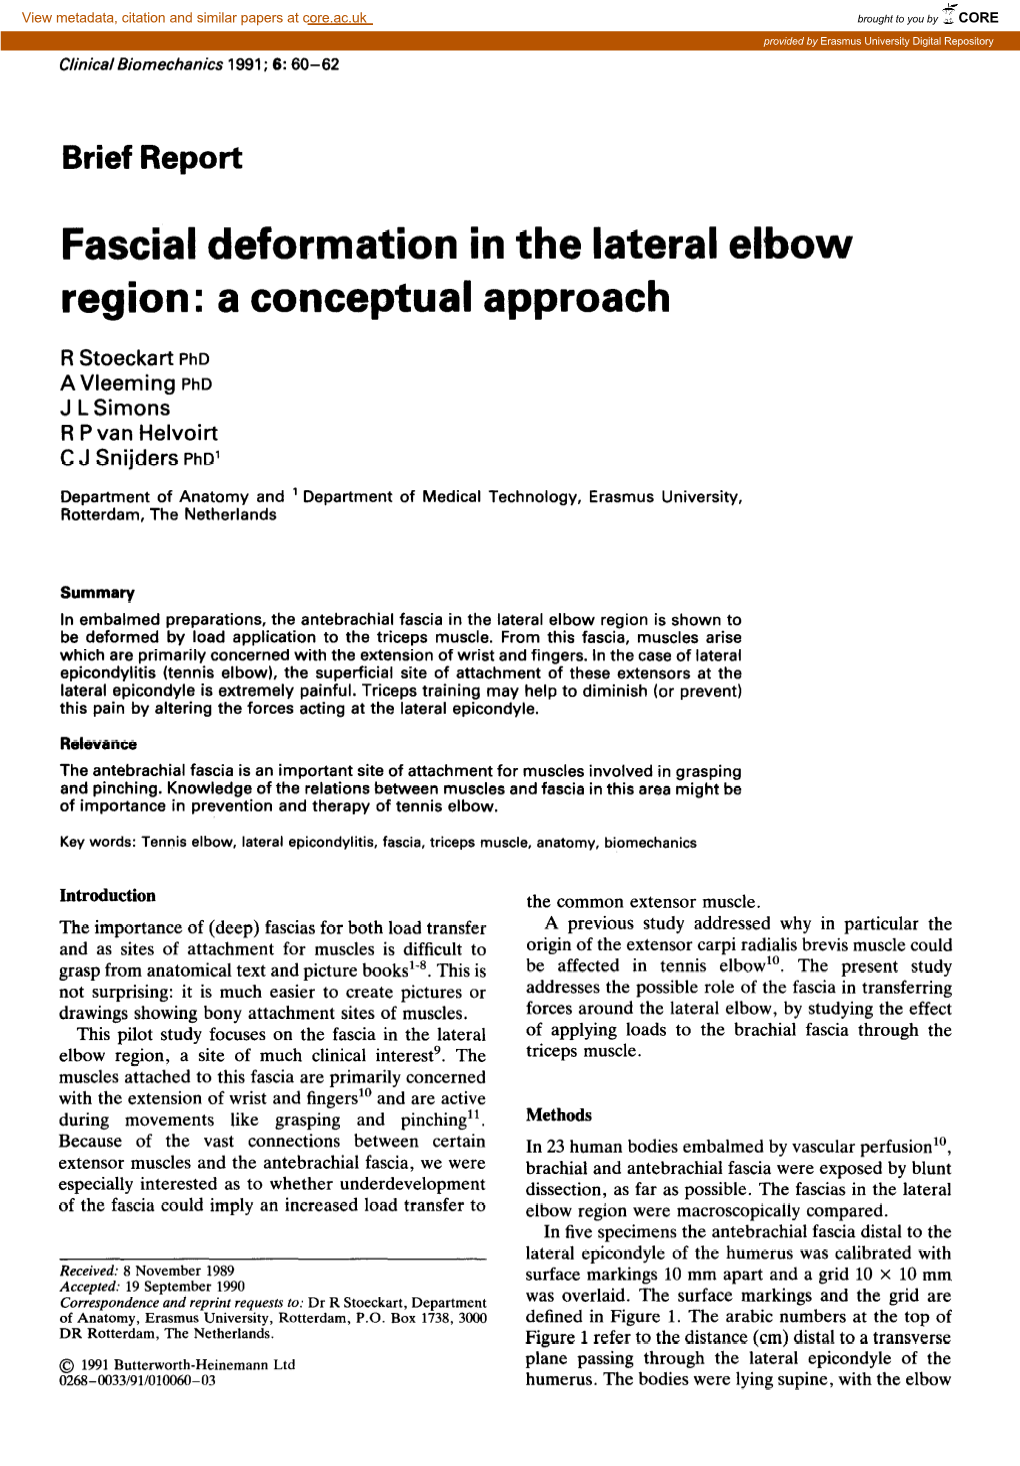 Fascial Deformation in the Lateral Elbow Region: a Conceptual Approach